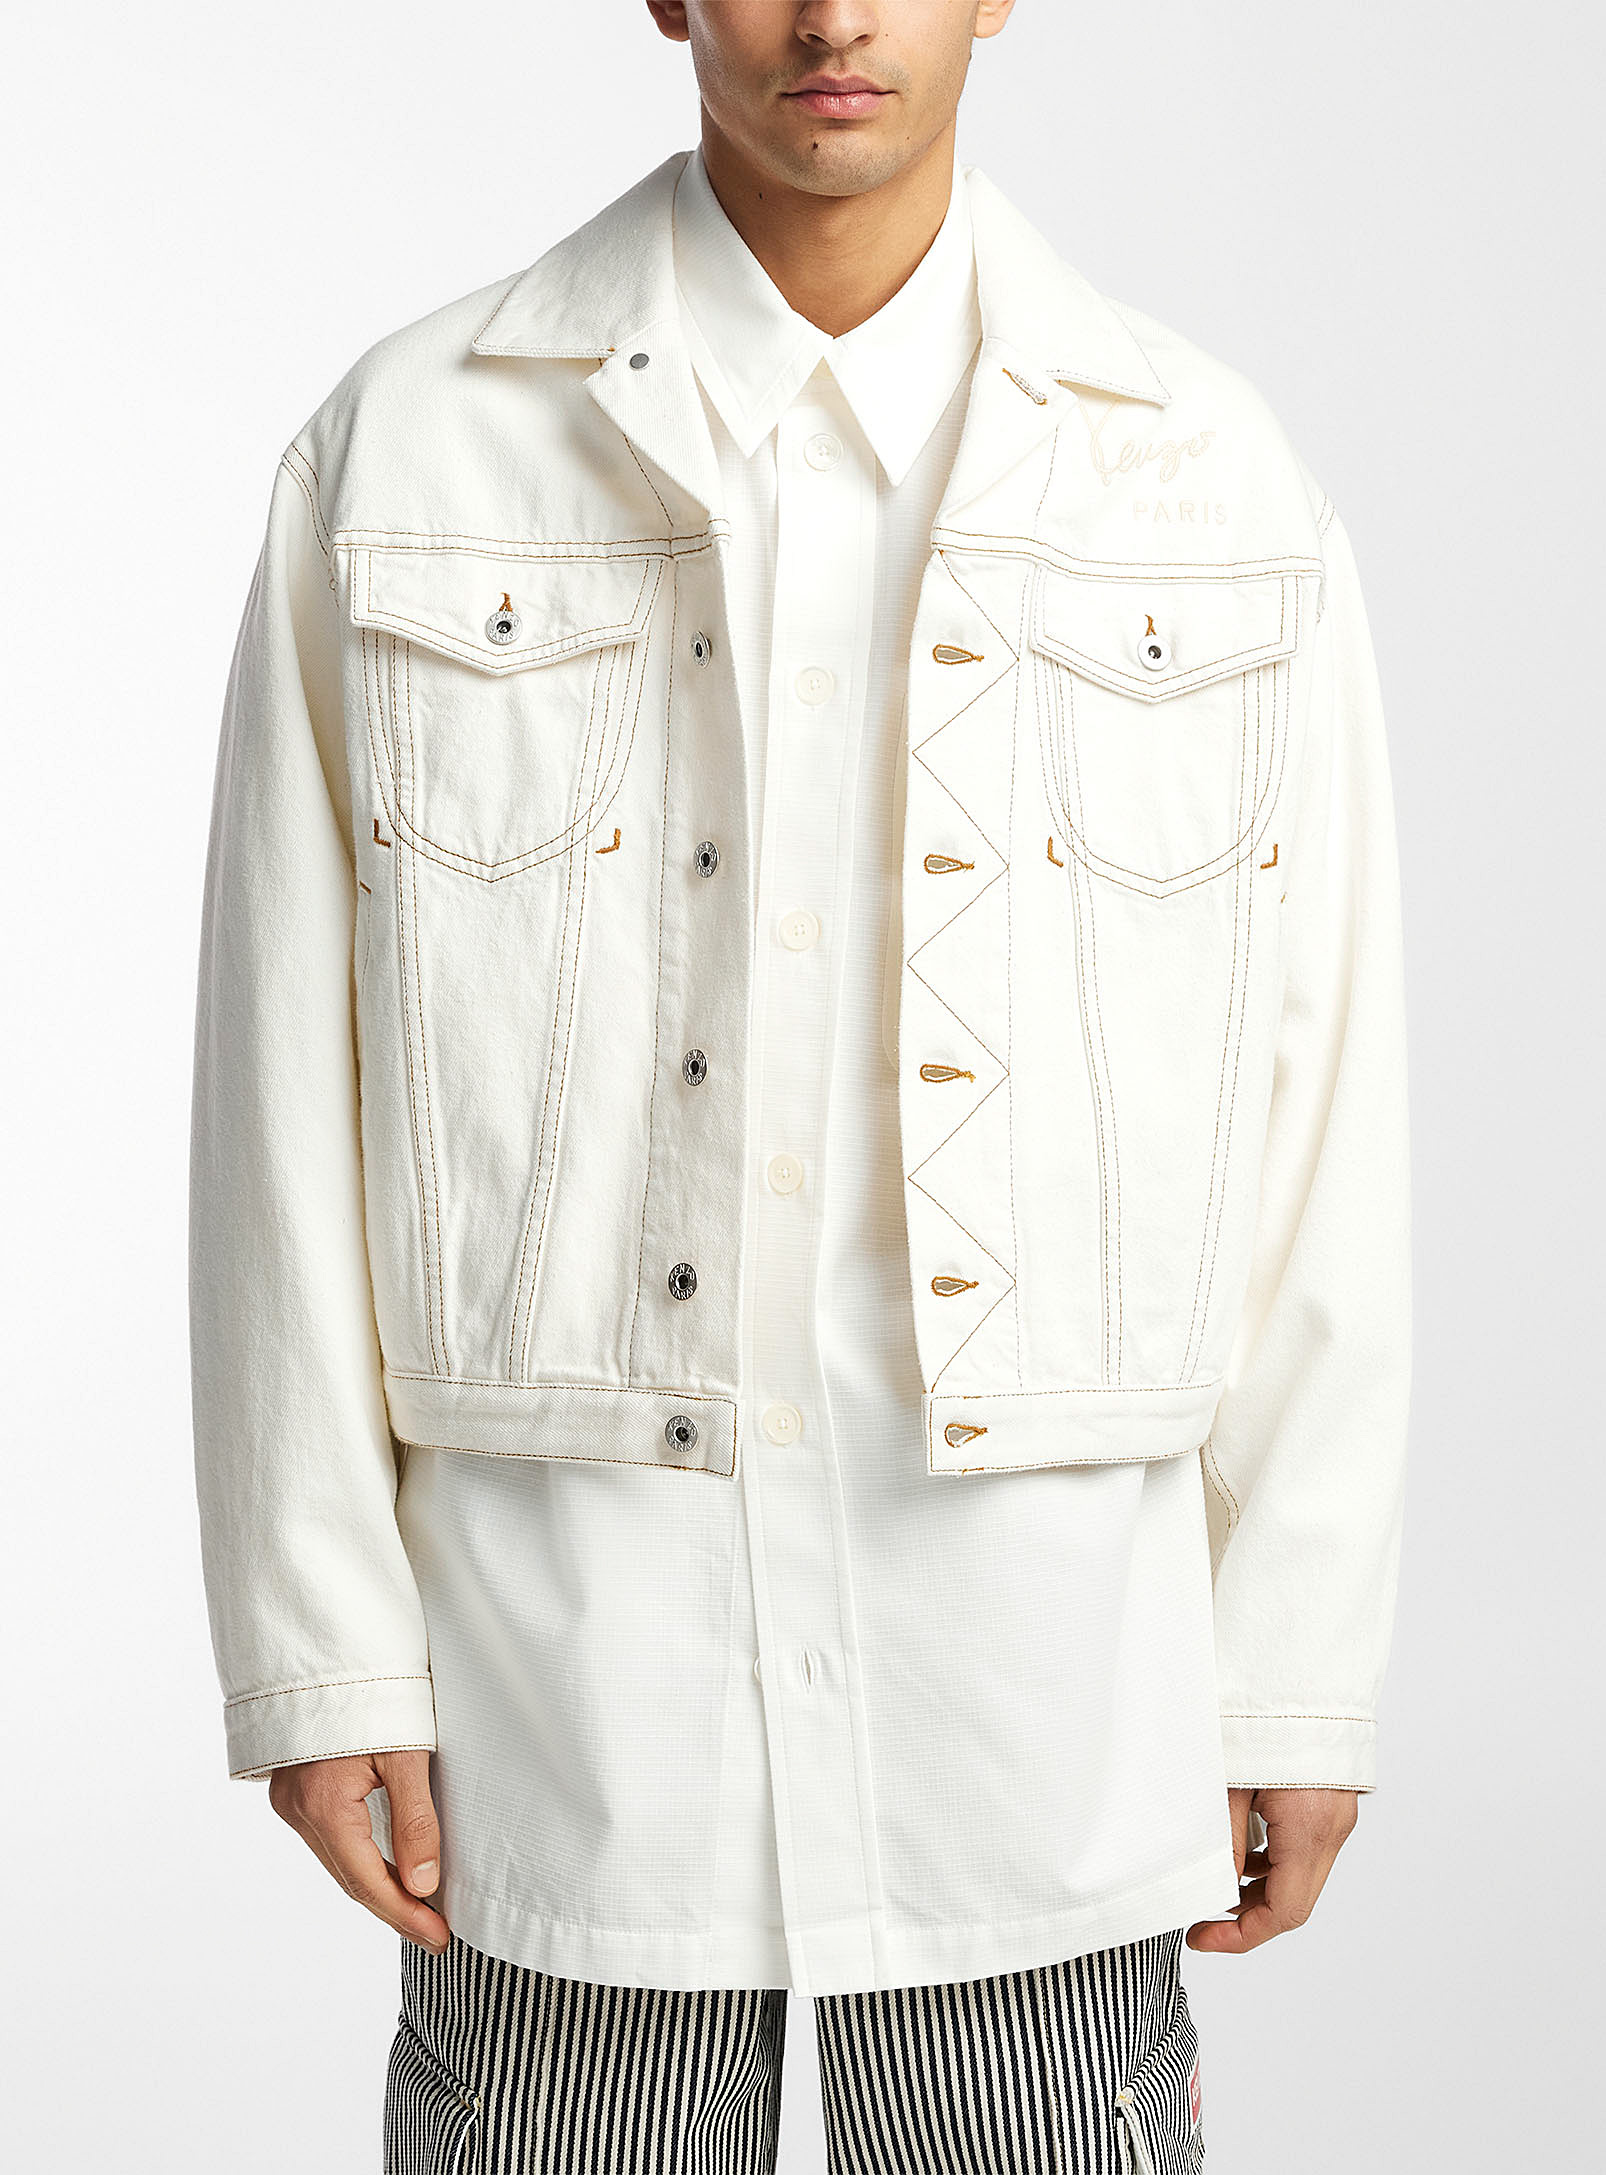 Kenzo - Men's Créations embroidered trucker jacket